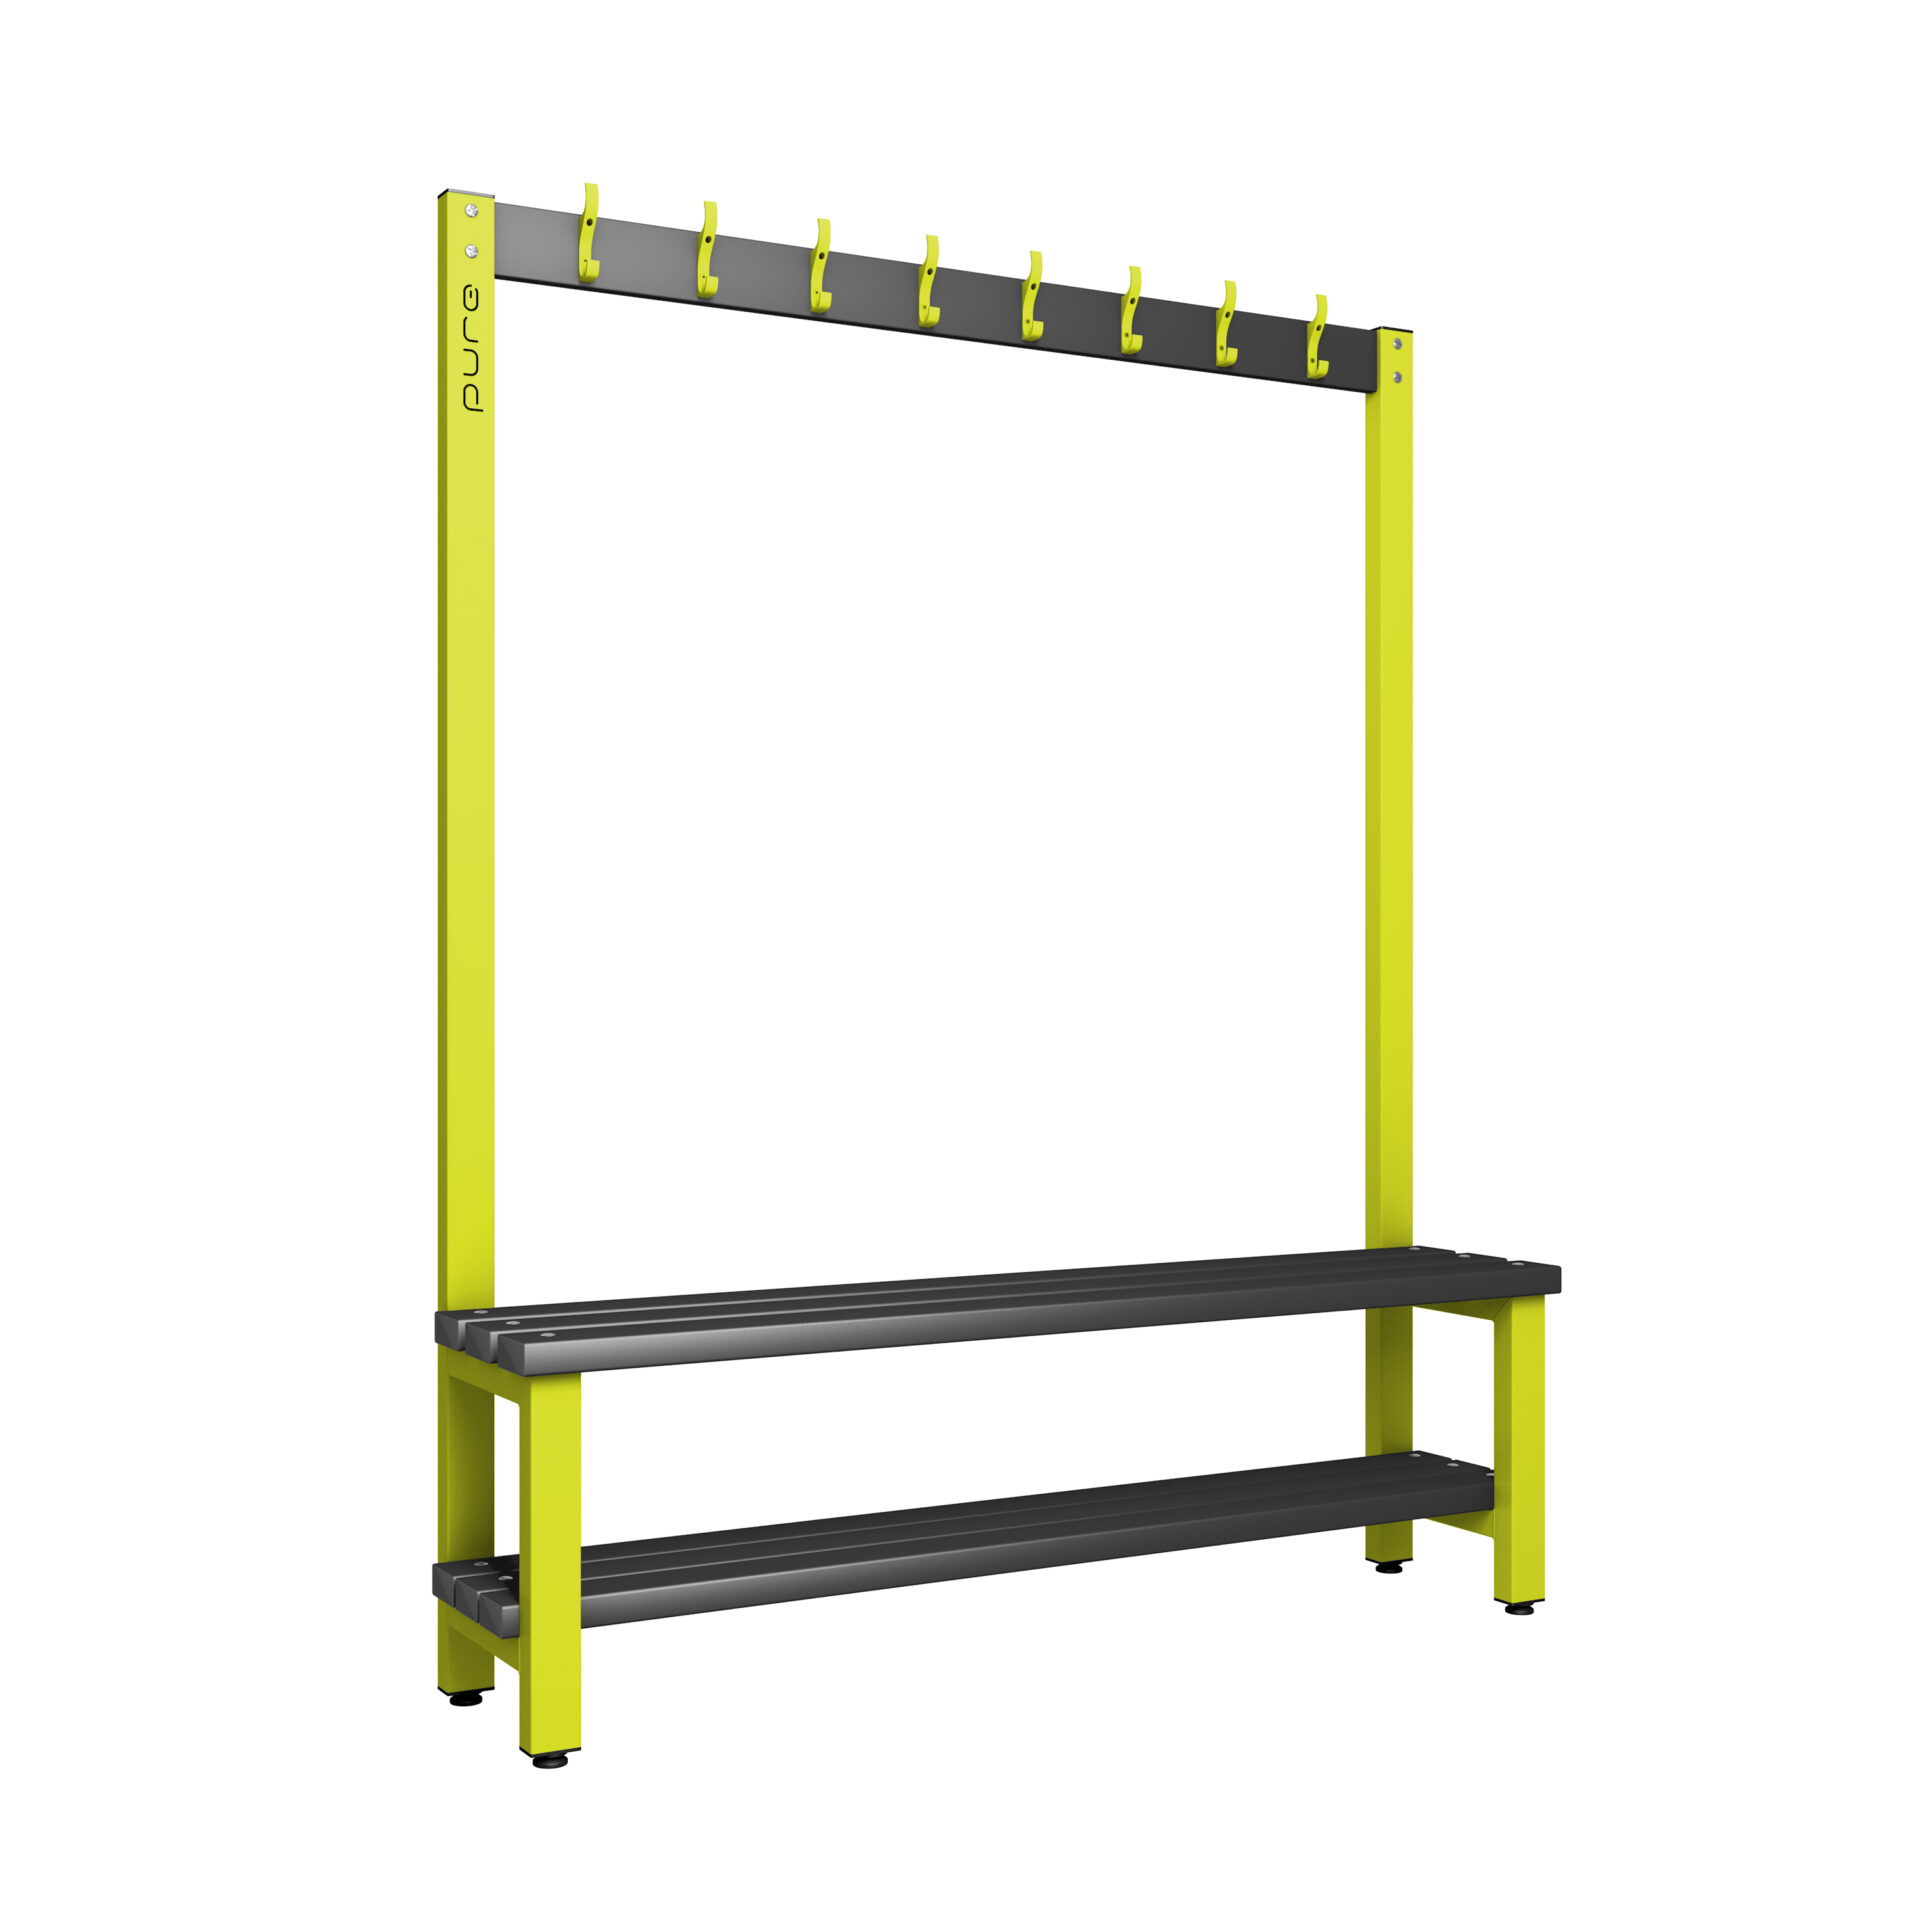 Pure Carbon Zero Single Sided 1500mm 8 Hook Bench With Shoe Shelf